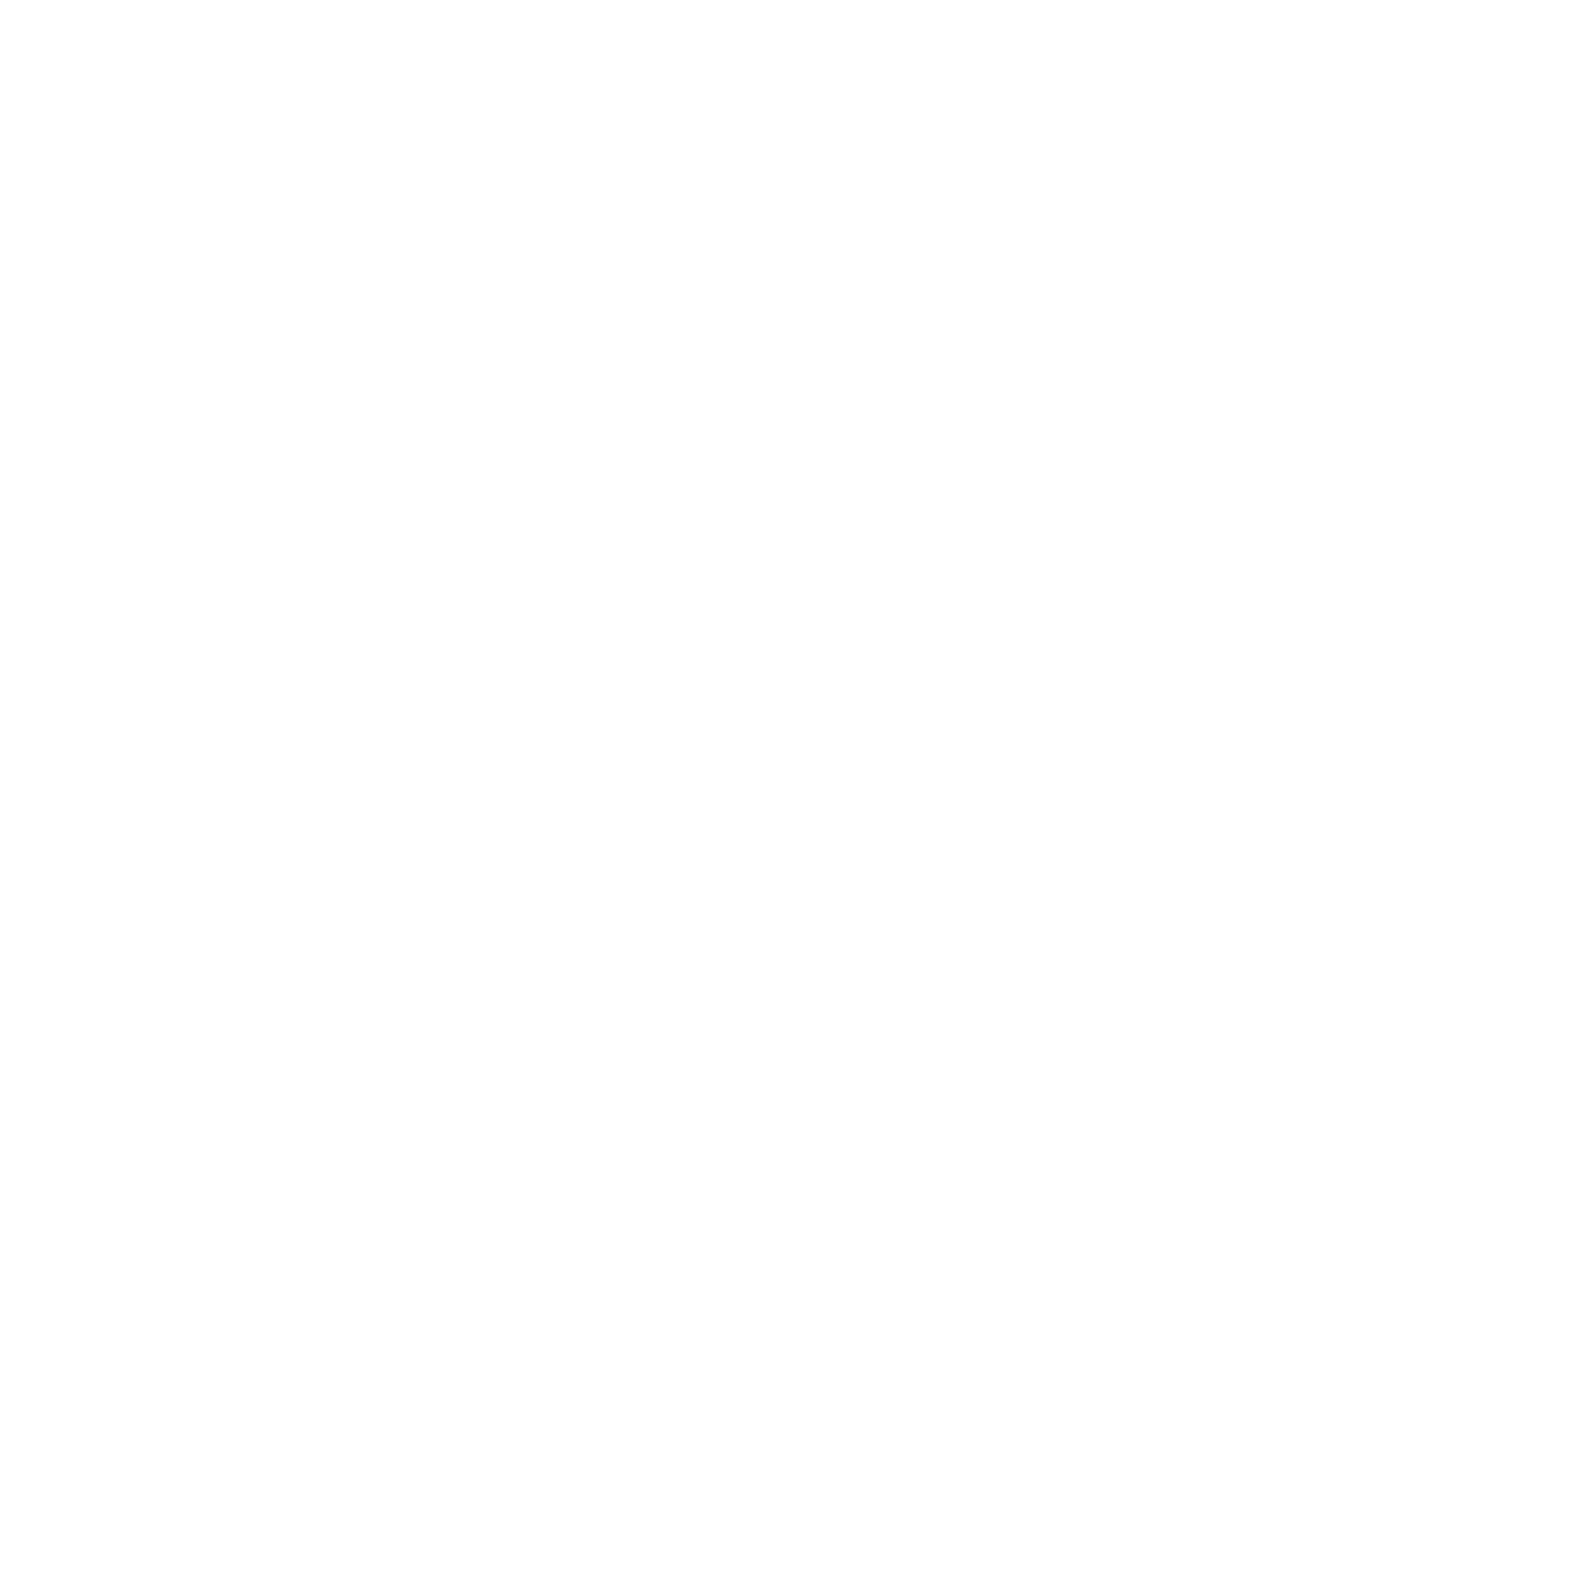 Polished By The Lash Empire logo